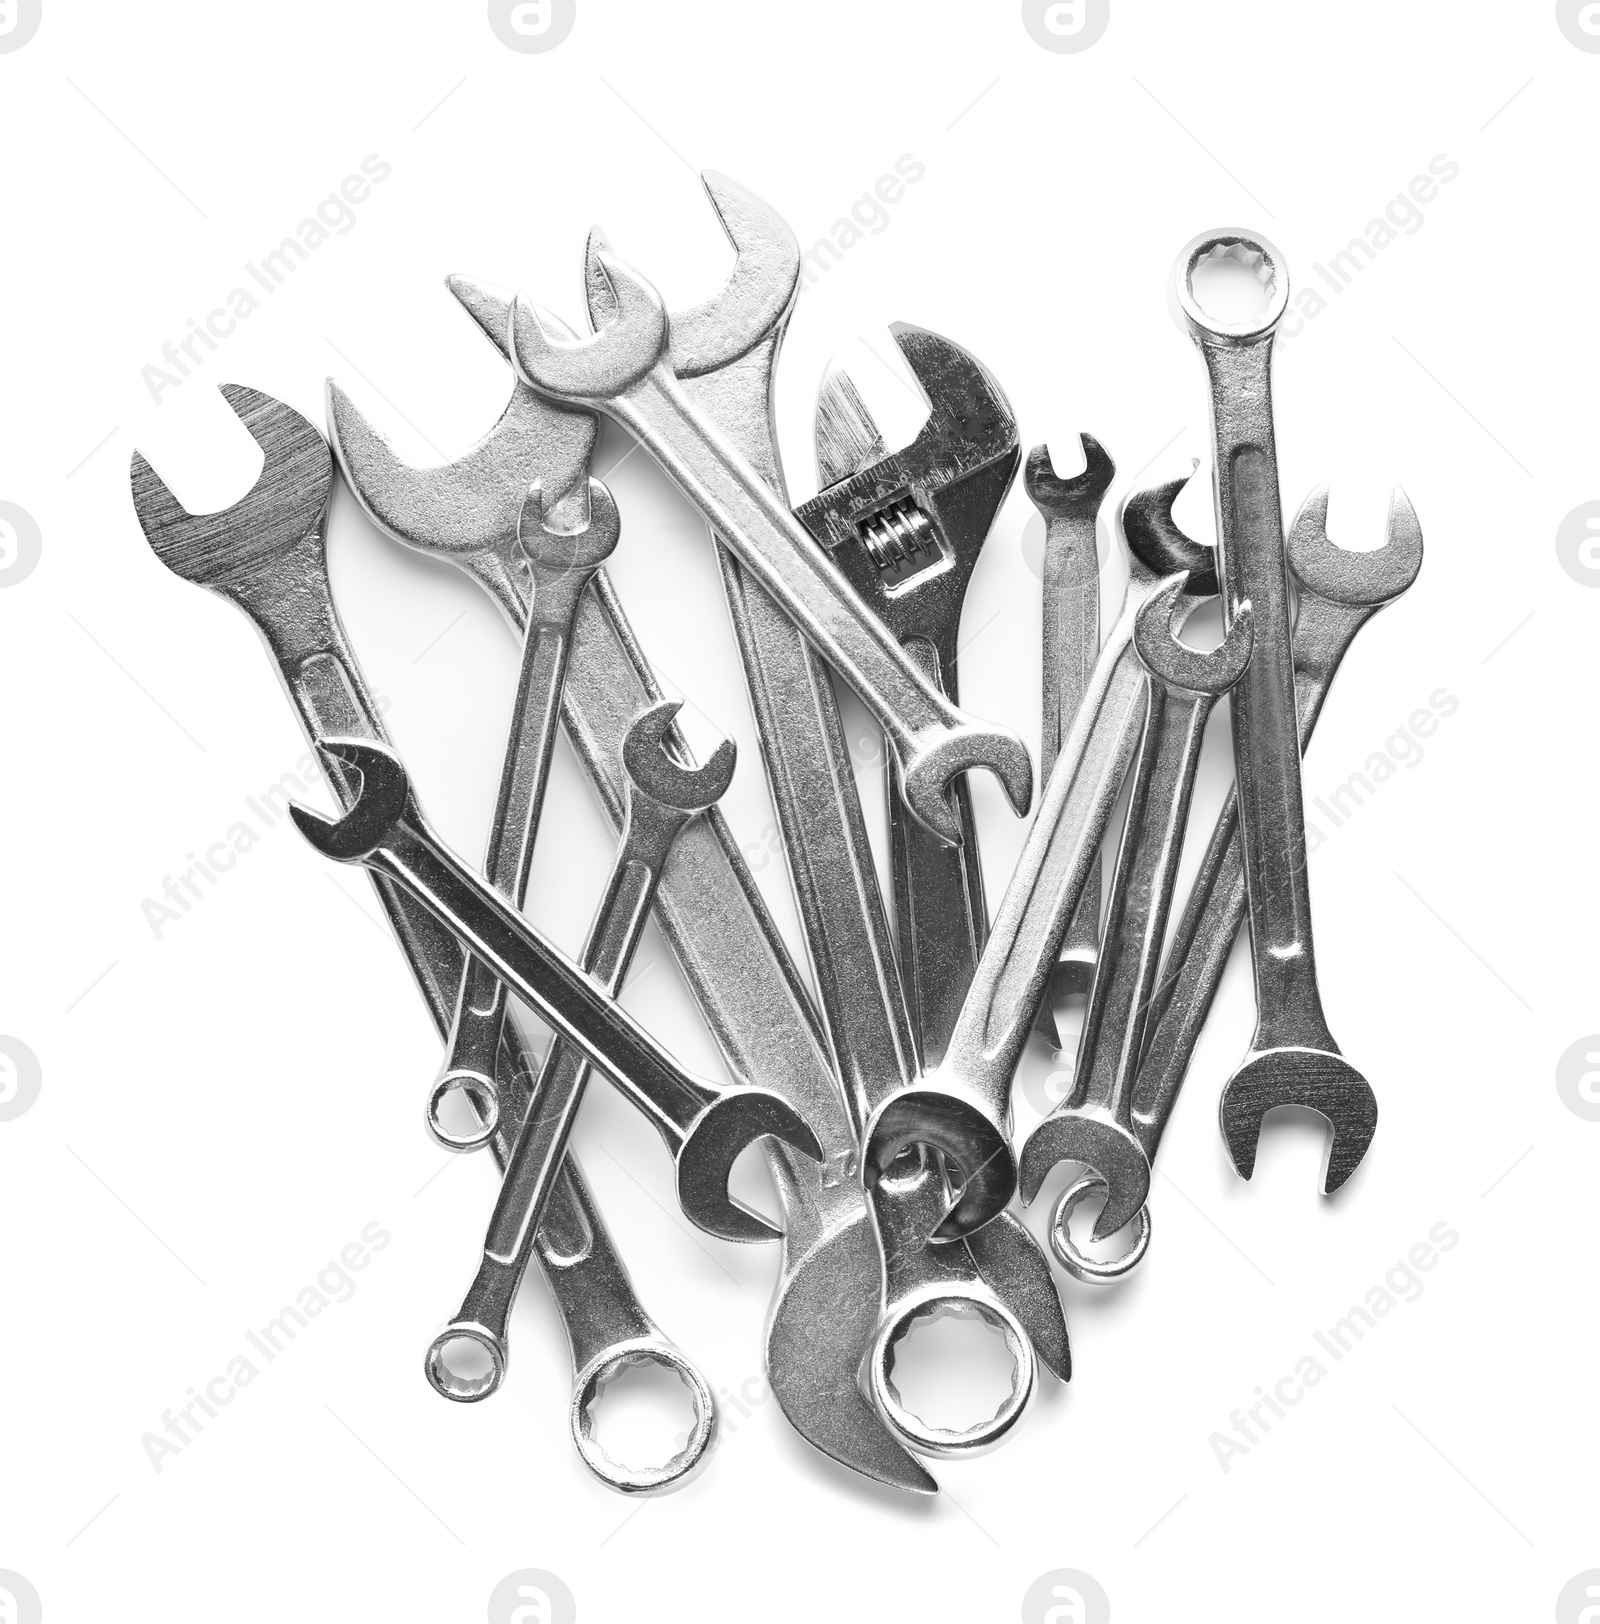 Photo of Set of different wrenches on white background, top view. Plumbing tools